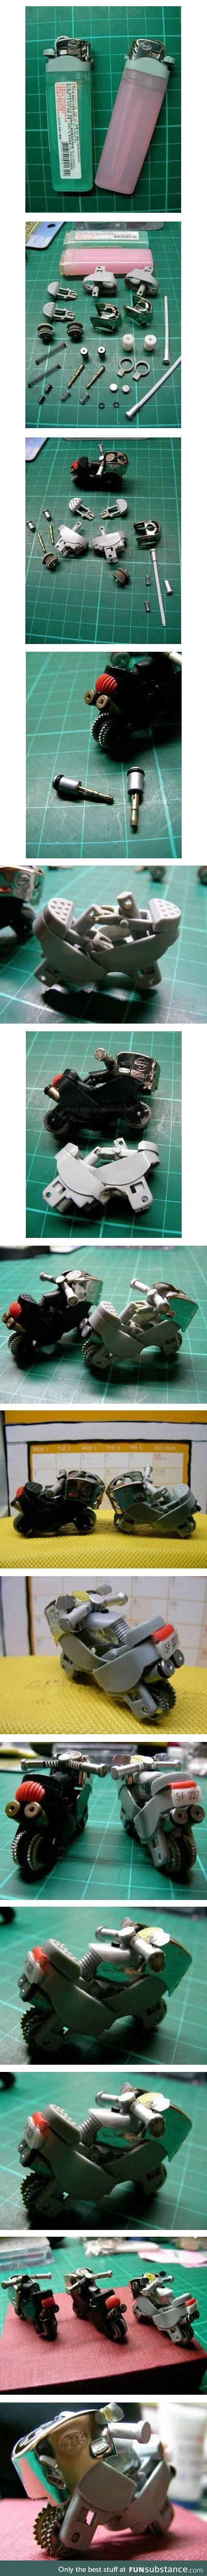 Who the hell figures out you can build motorbikes out of these lighters?!